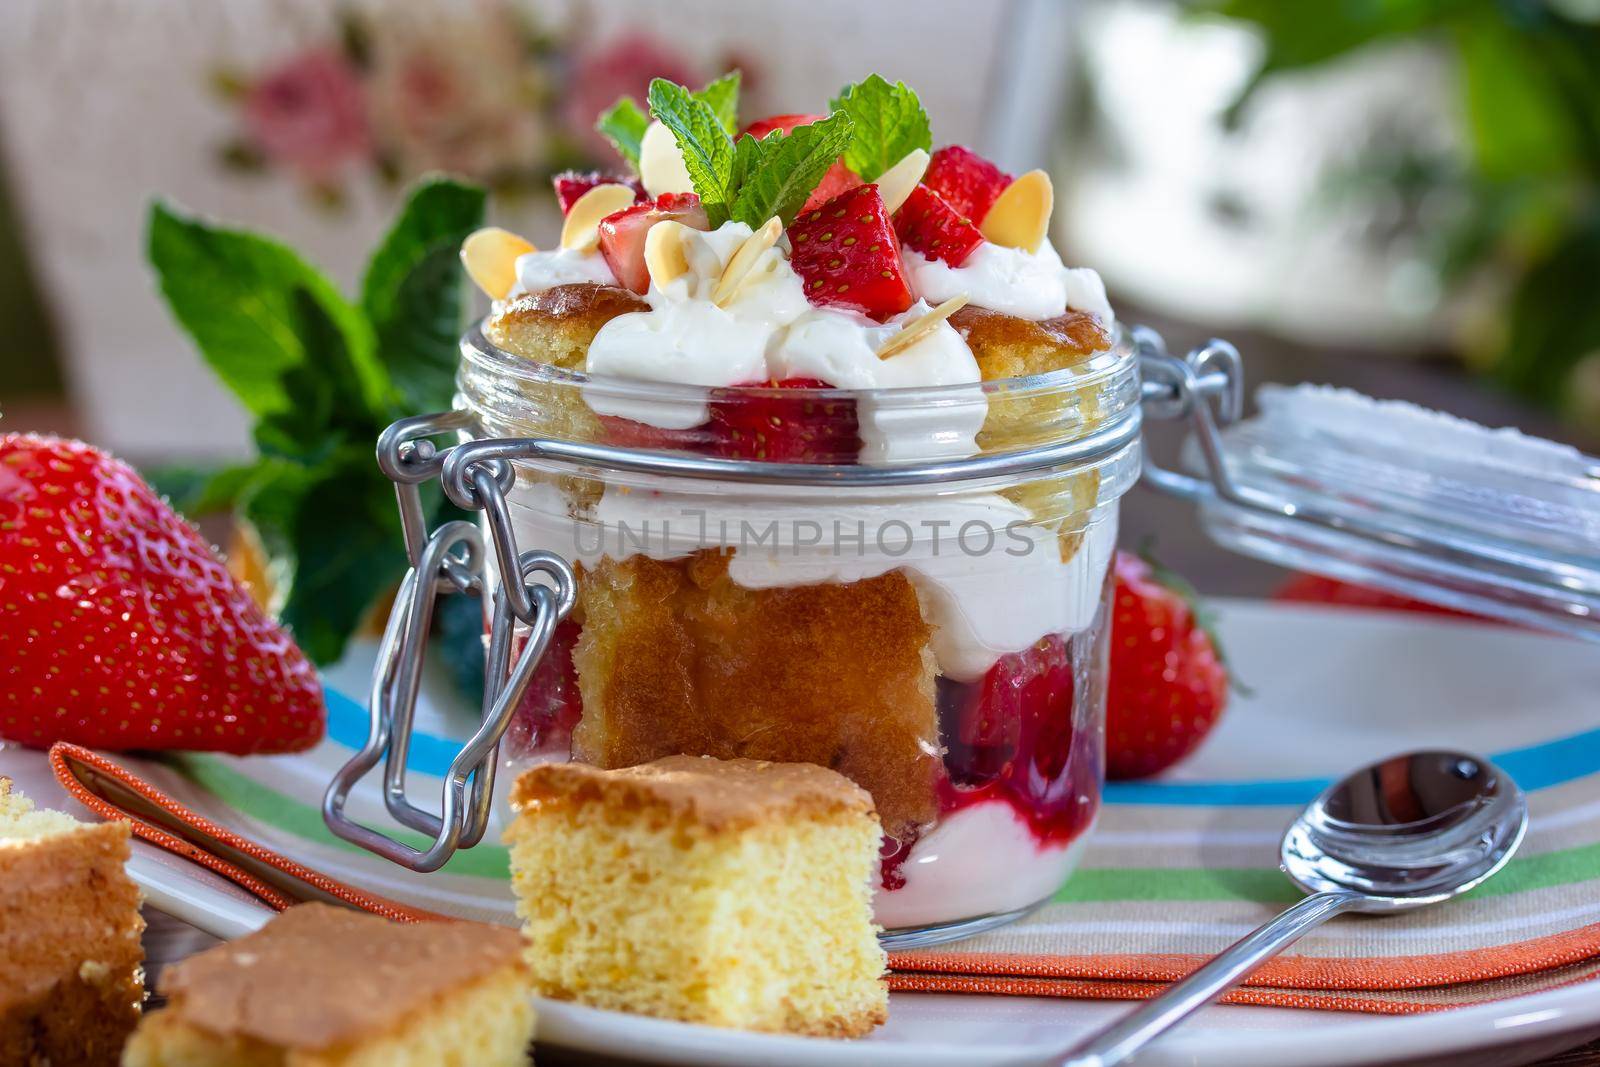 Layered Dessert of chocolate sponge cake, whipped cream or ricotta and fresh strawberries in a glass bowl. Trifle. Delicious gourmet breakfast. by Milanchikov